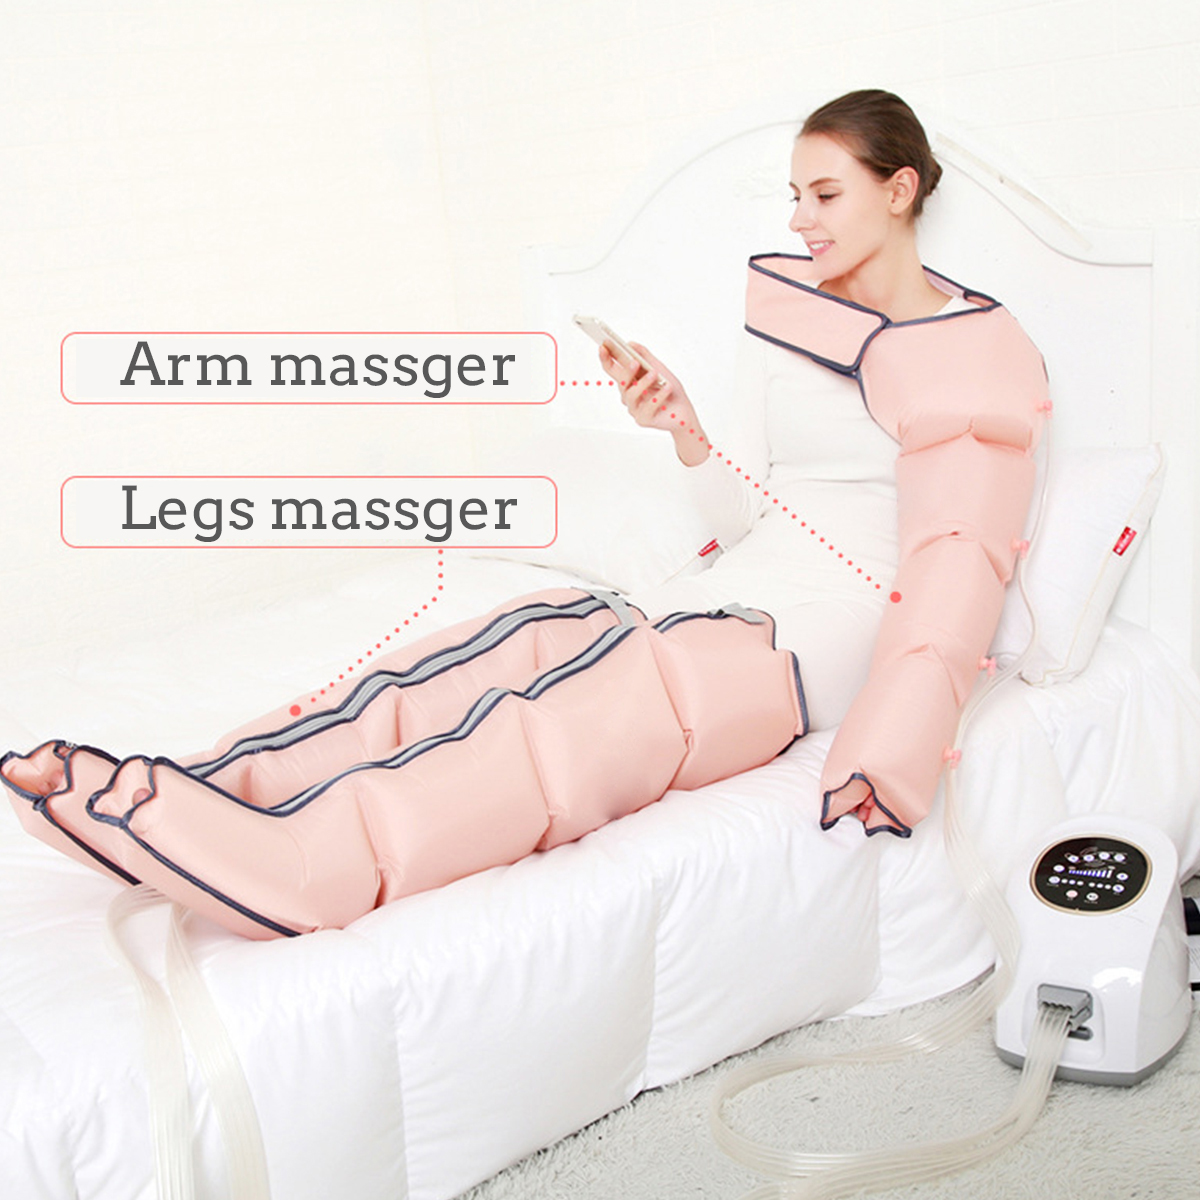 Electric-Air-Pressure-Leg-Waist-Arm-Massager-Kneading-Extrusion-Therapy-Massager-3-Modes-Time-Settin-1740687-8